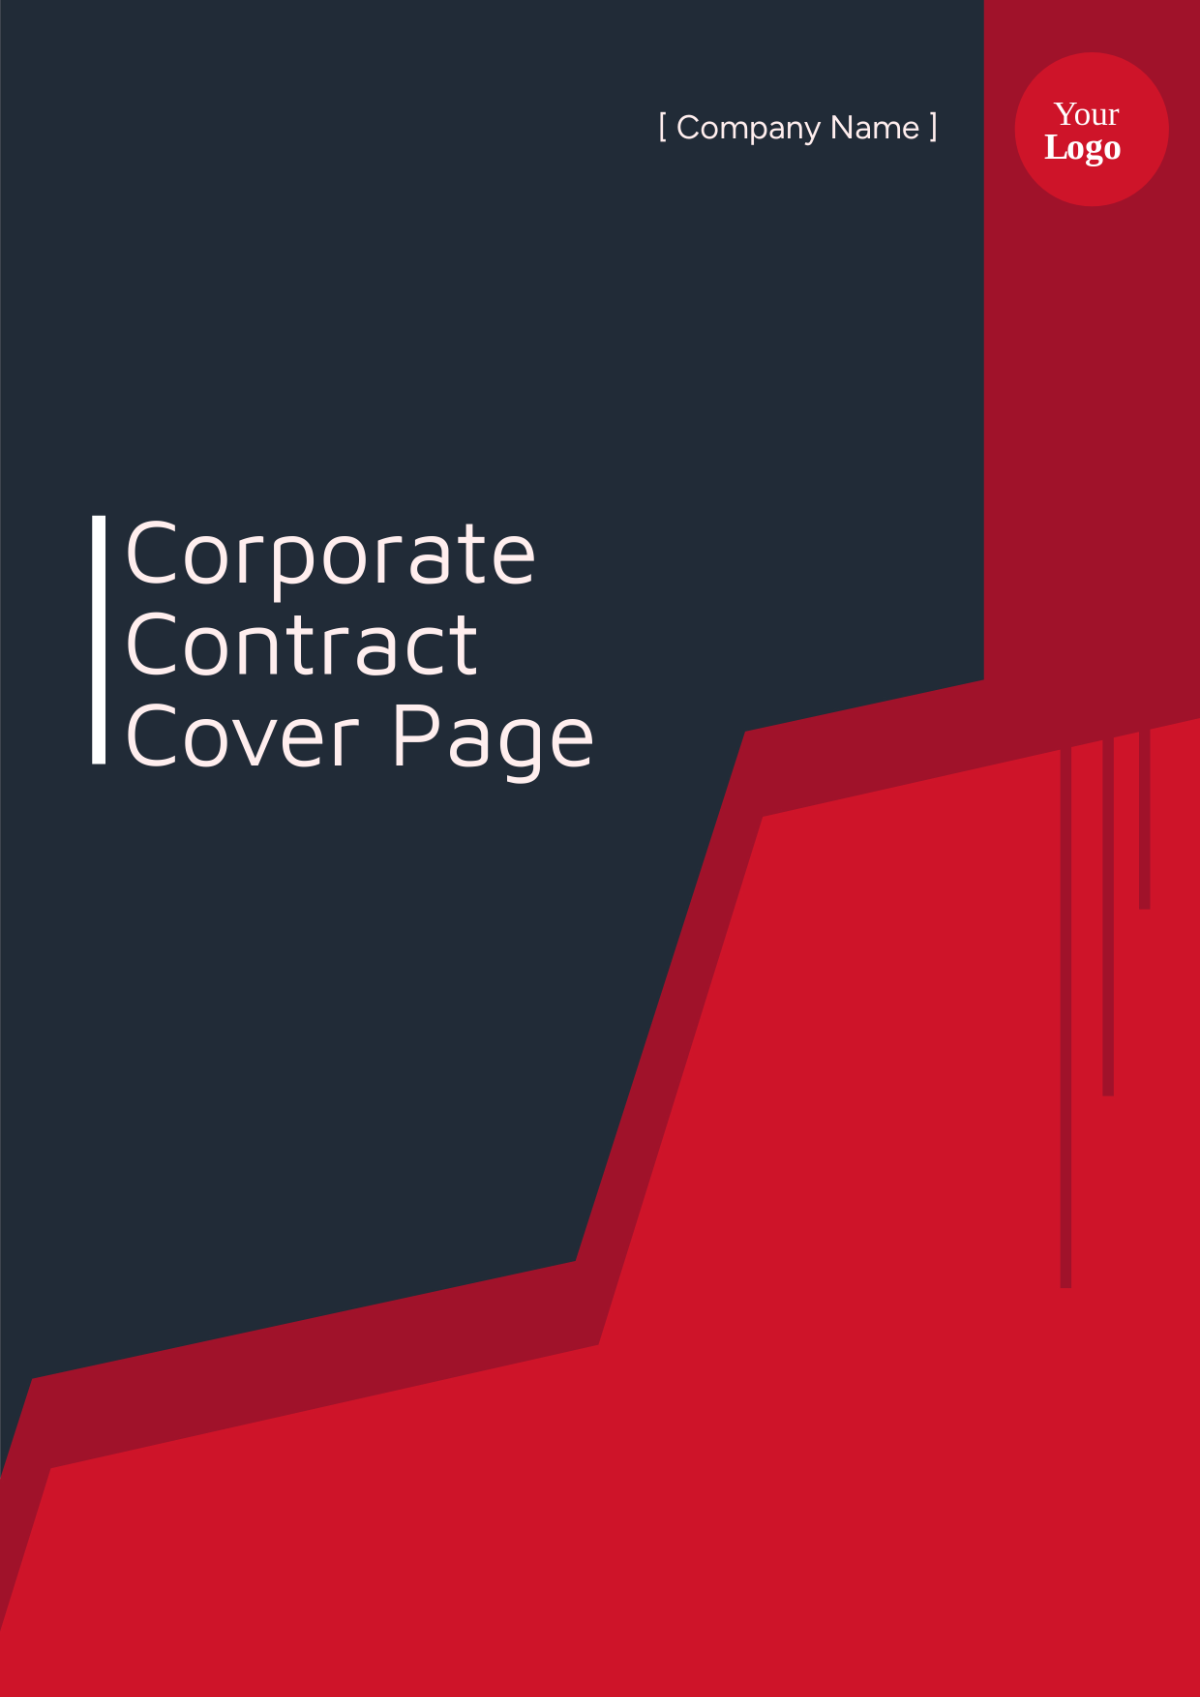 Corporate Contract Cover Page Template